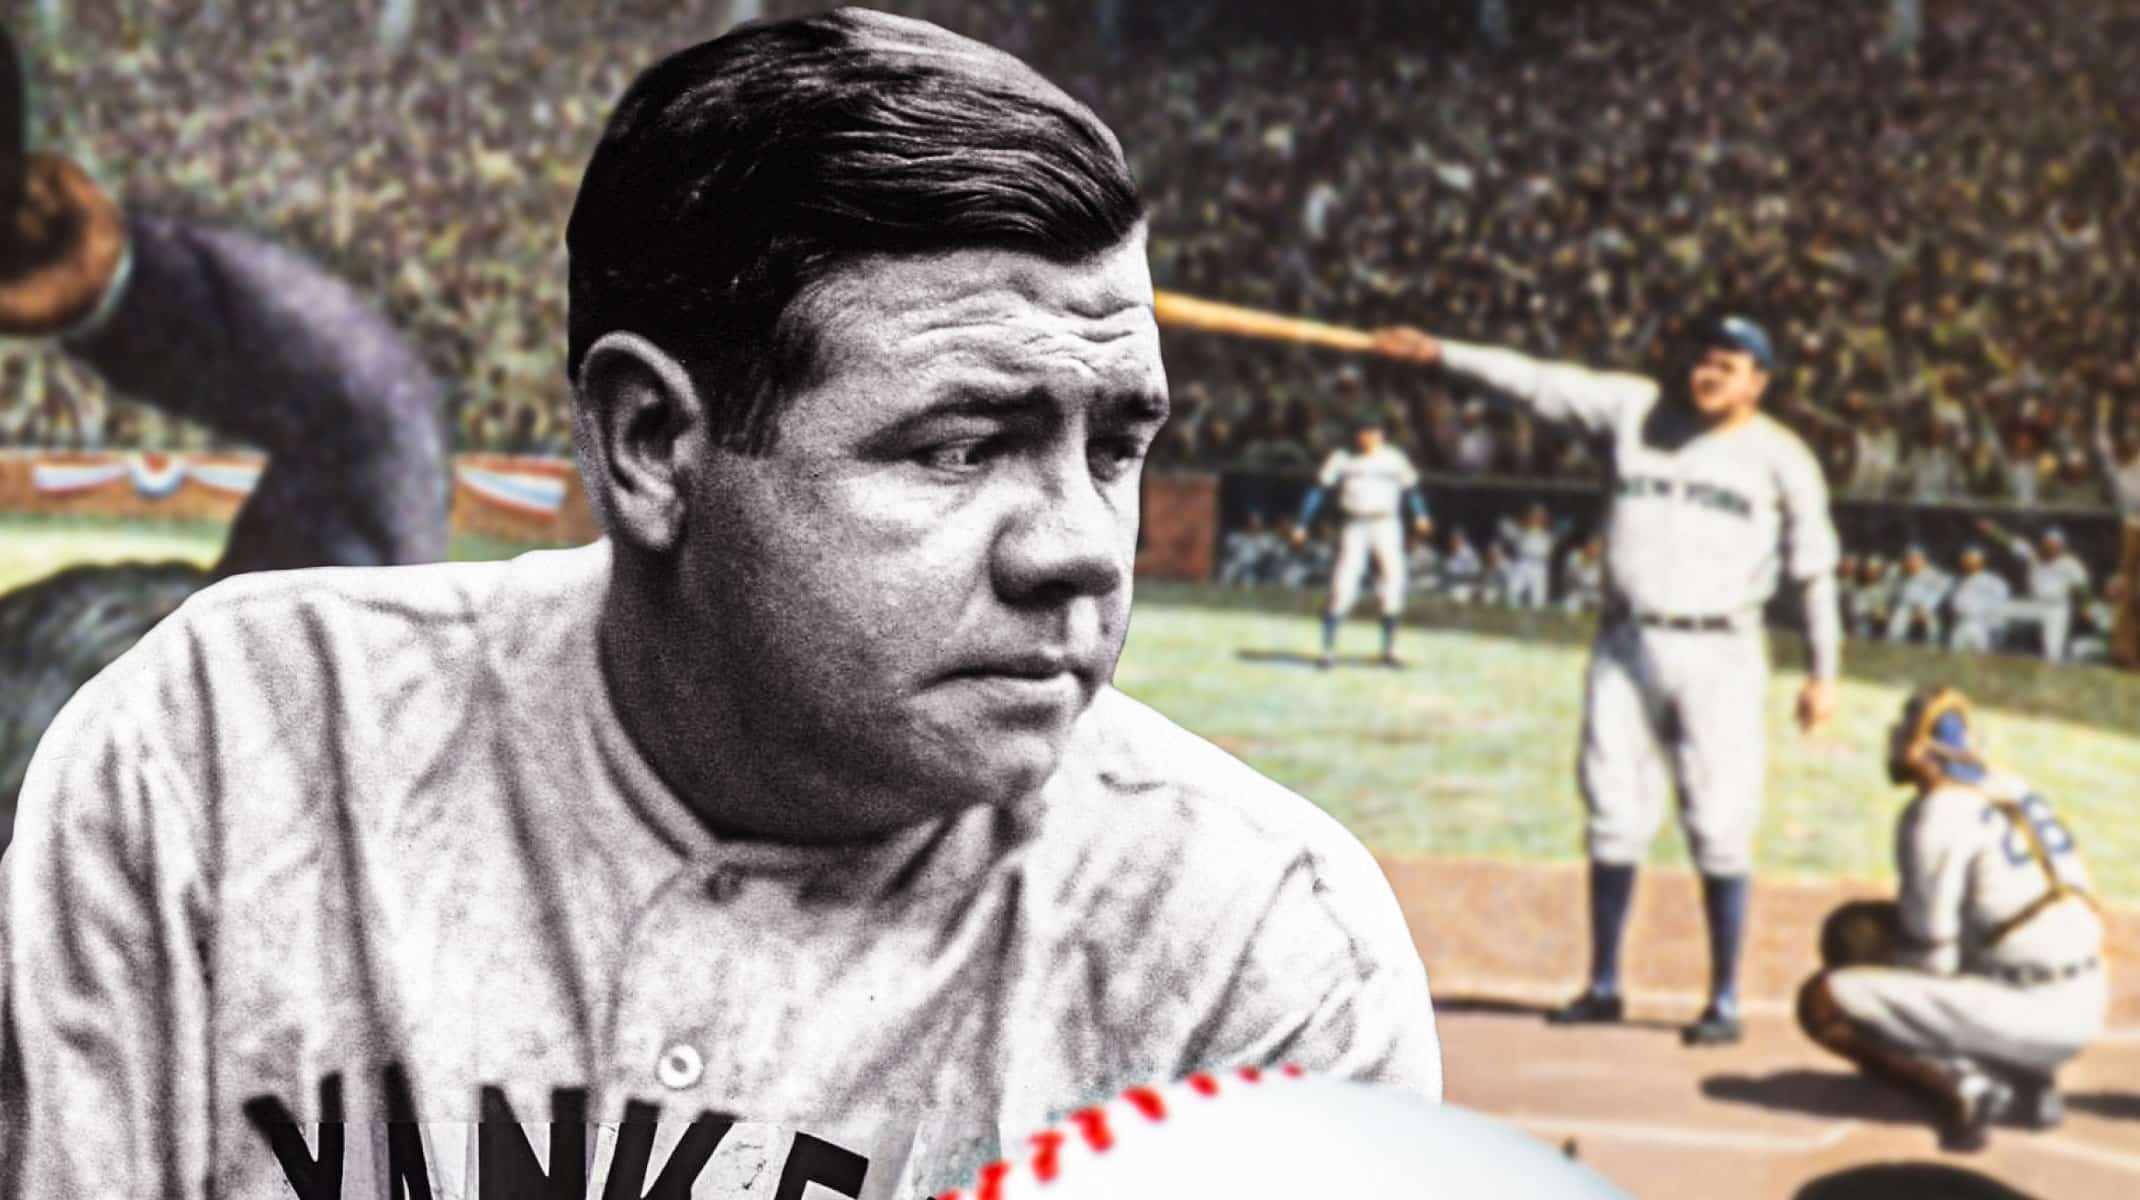 Yankees legend Babe Ruth's 'called shot' jersey hit with potential $30 million price tag